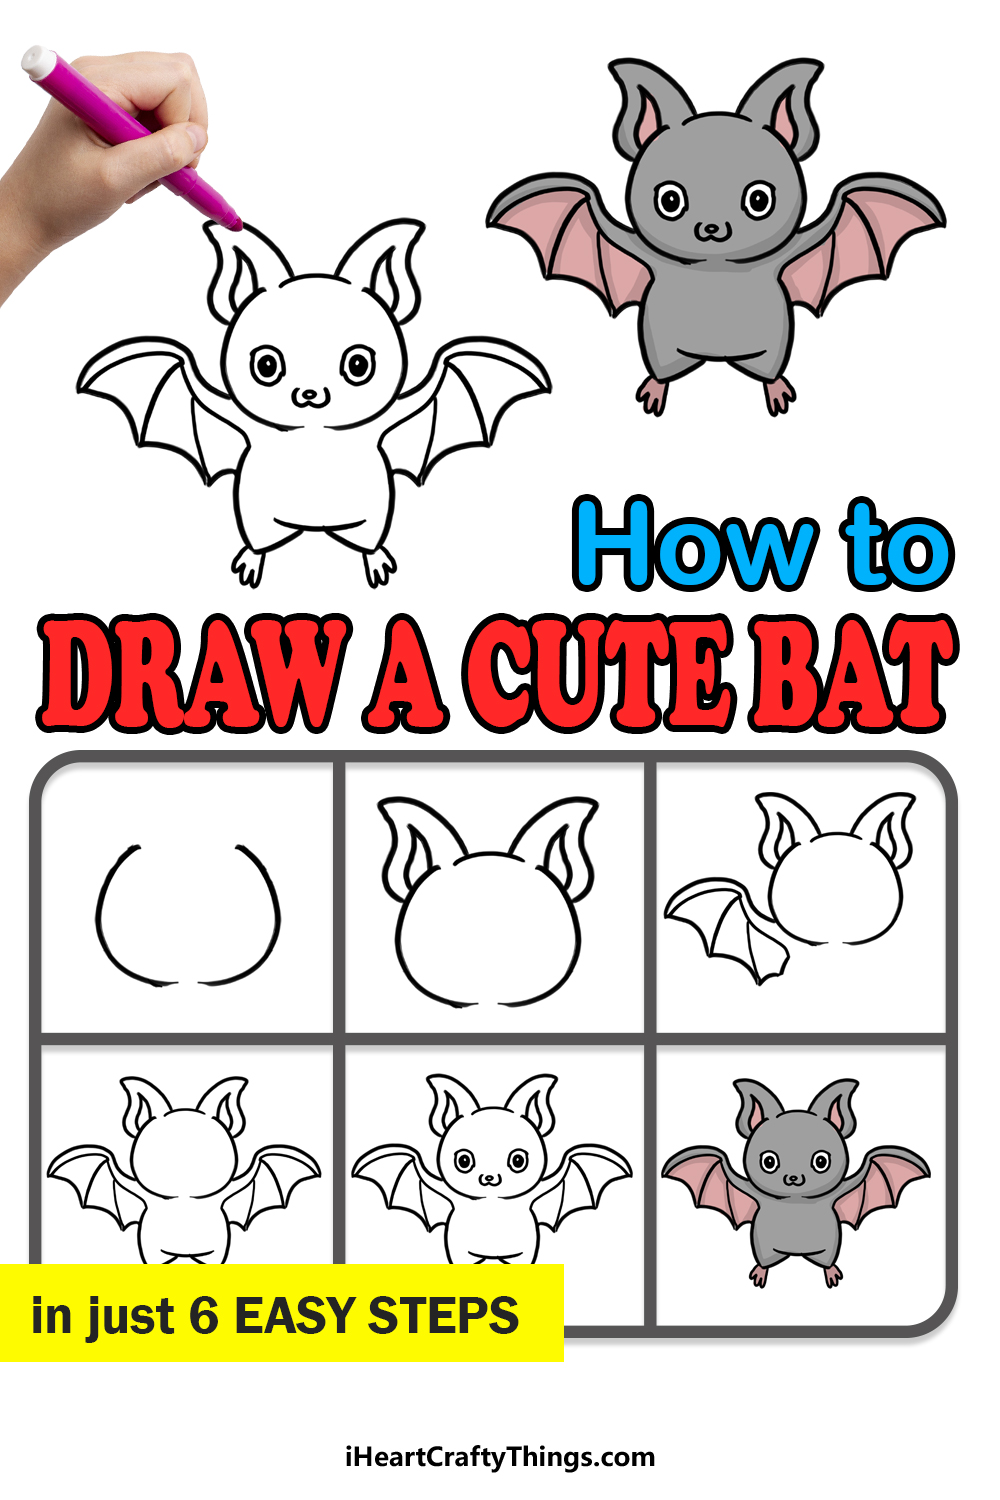 How to Draw A Cute Bat step by step guide